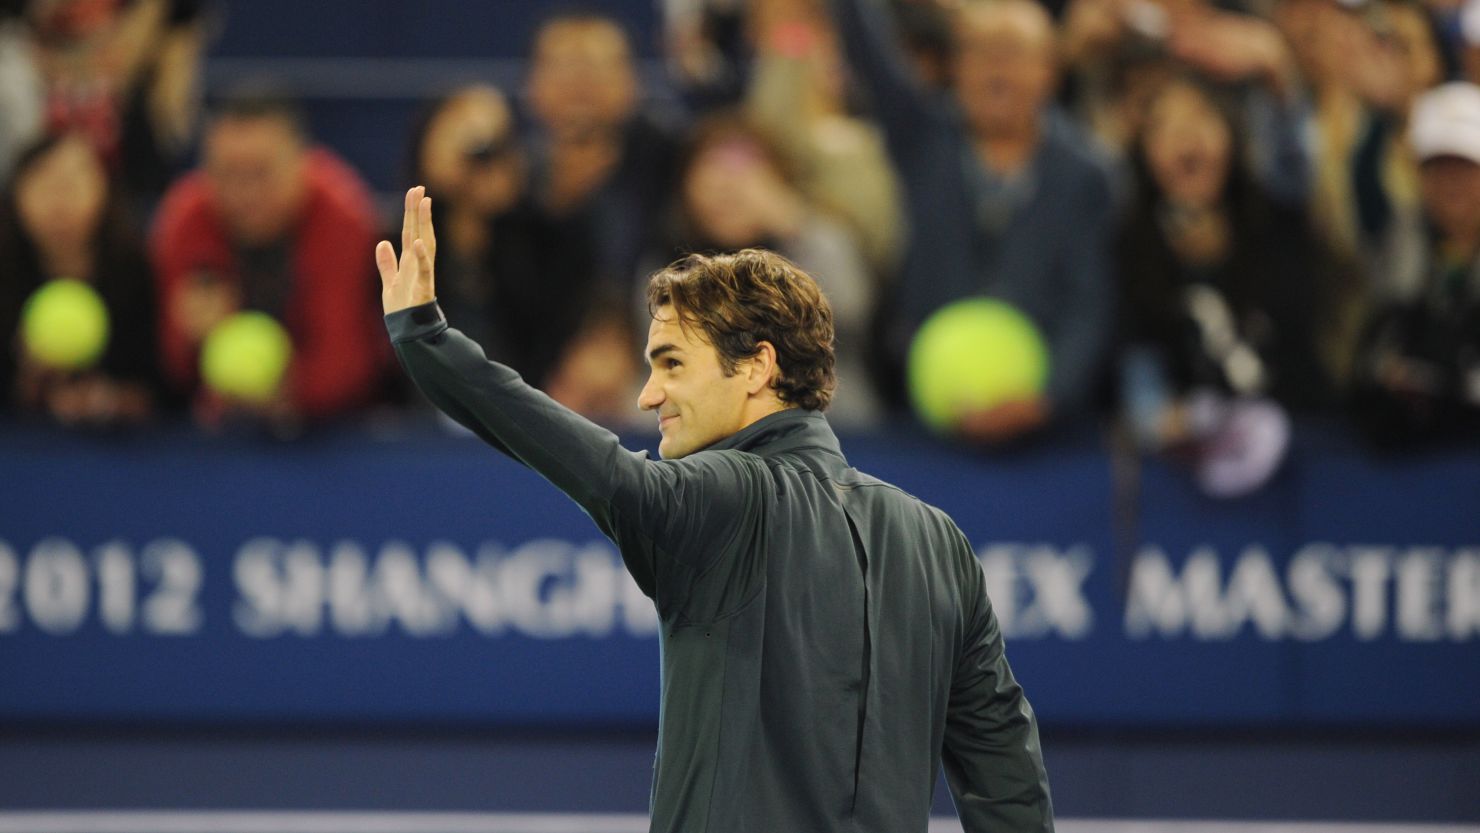 Roger Federer waves to the crowd in Shanghai after his victory over fellow Swiss Stanislas Wawrinka